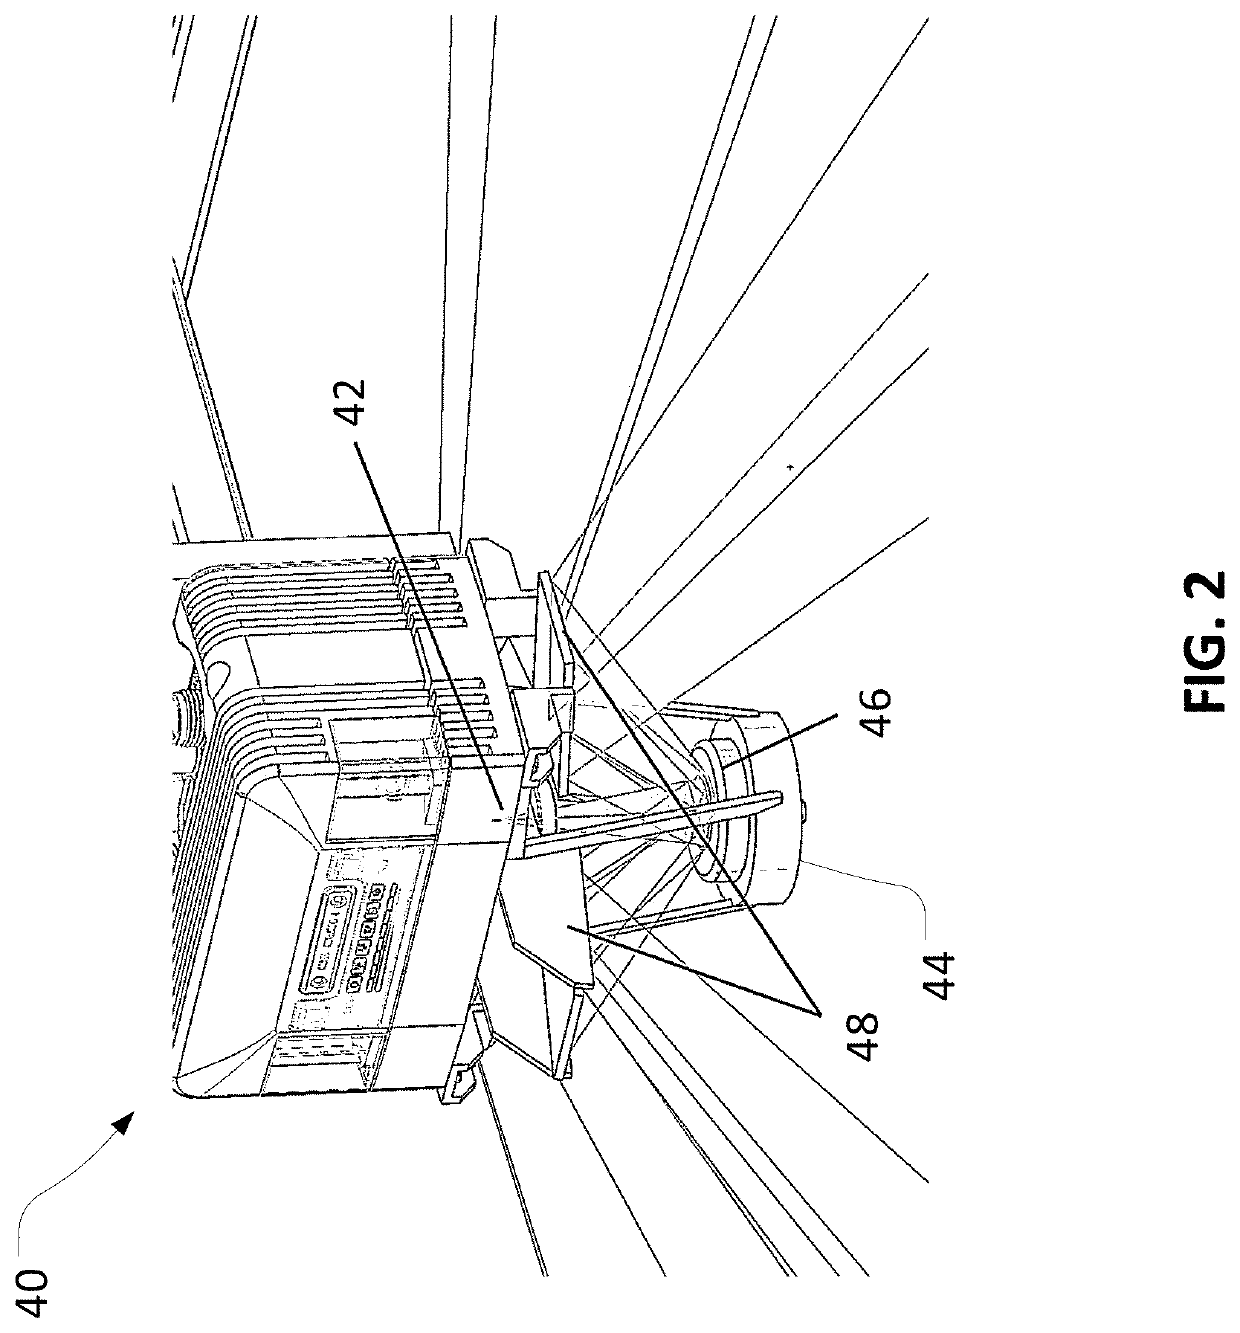 Machine vision system and method with steerable mirror